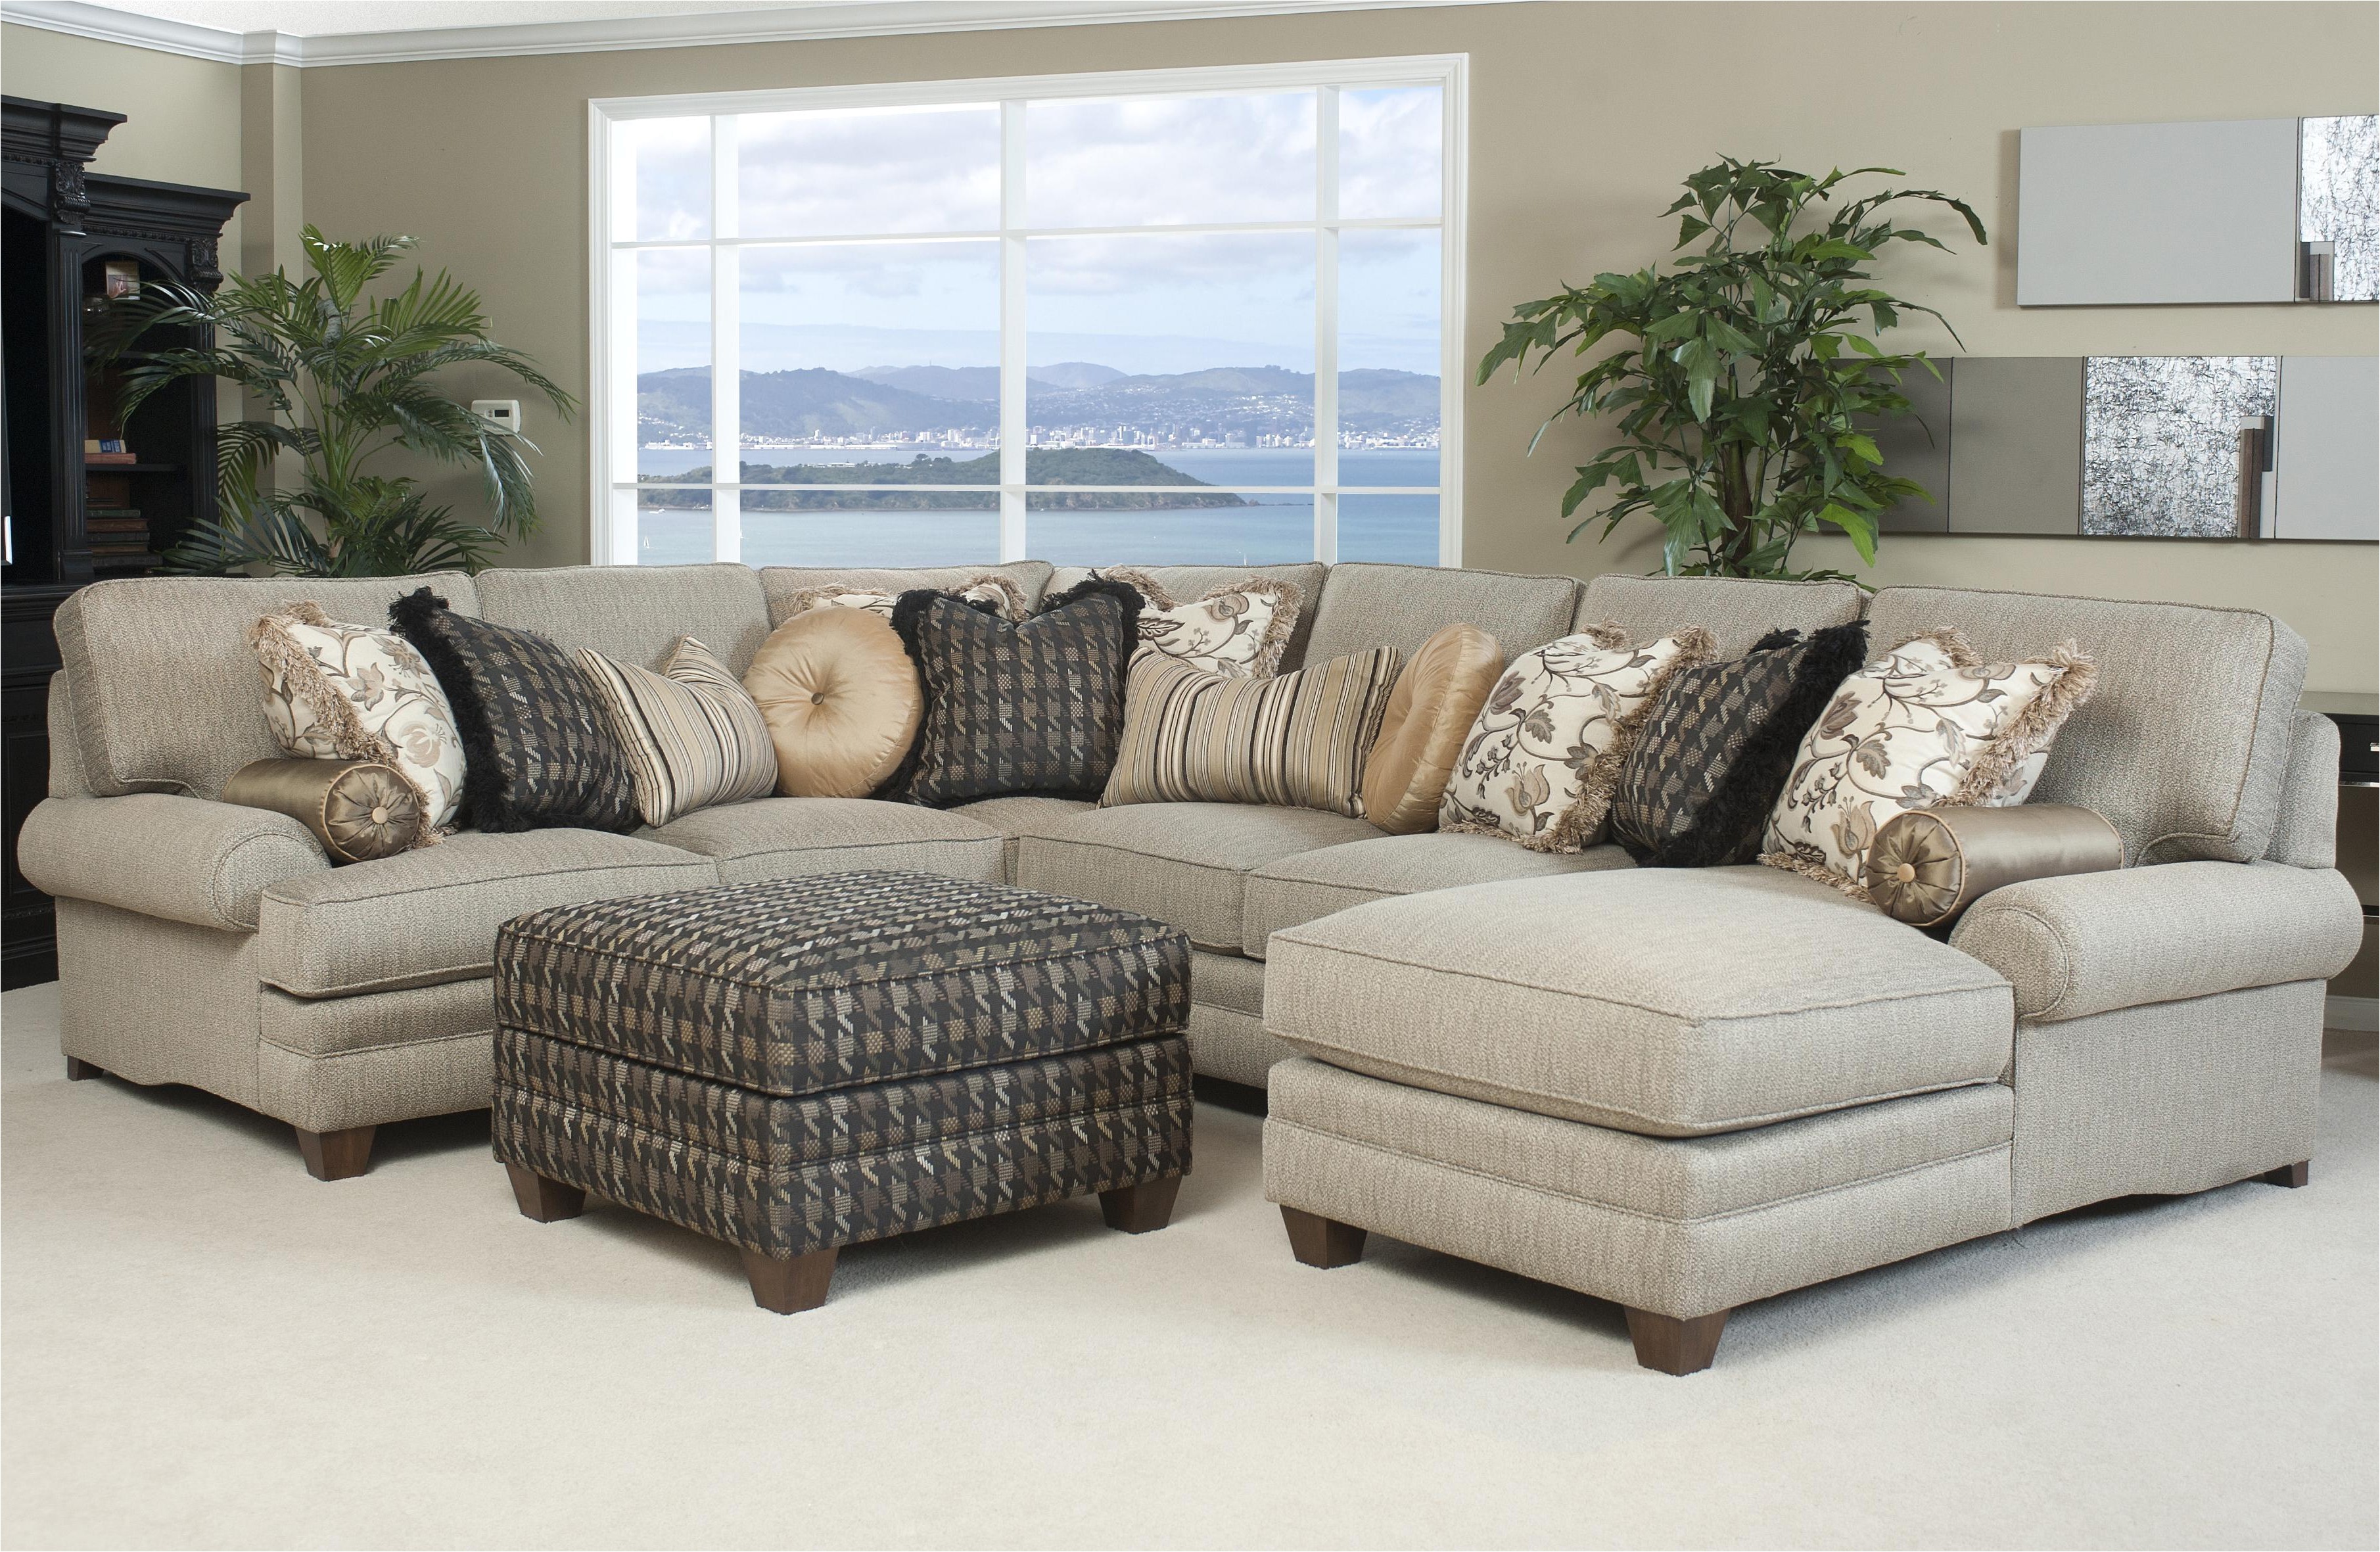 keegan sofa macys couch jonathan louis leathers home design leather reviews 5 94y home design the